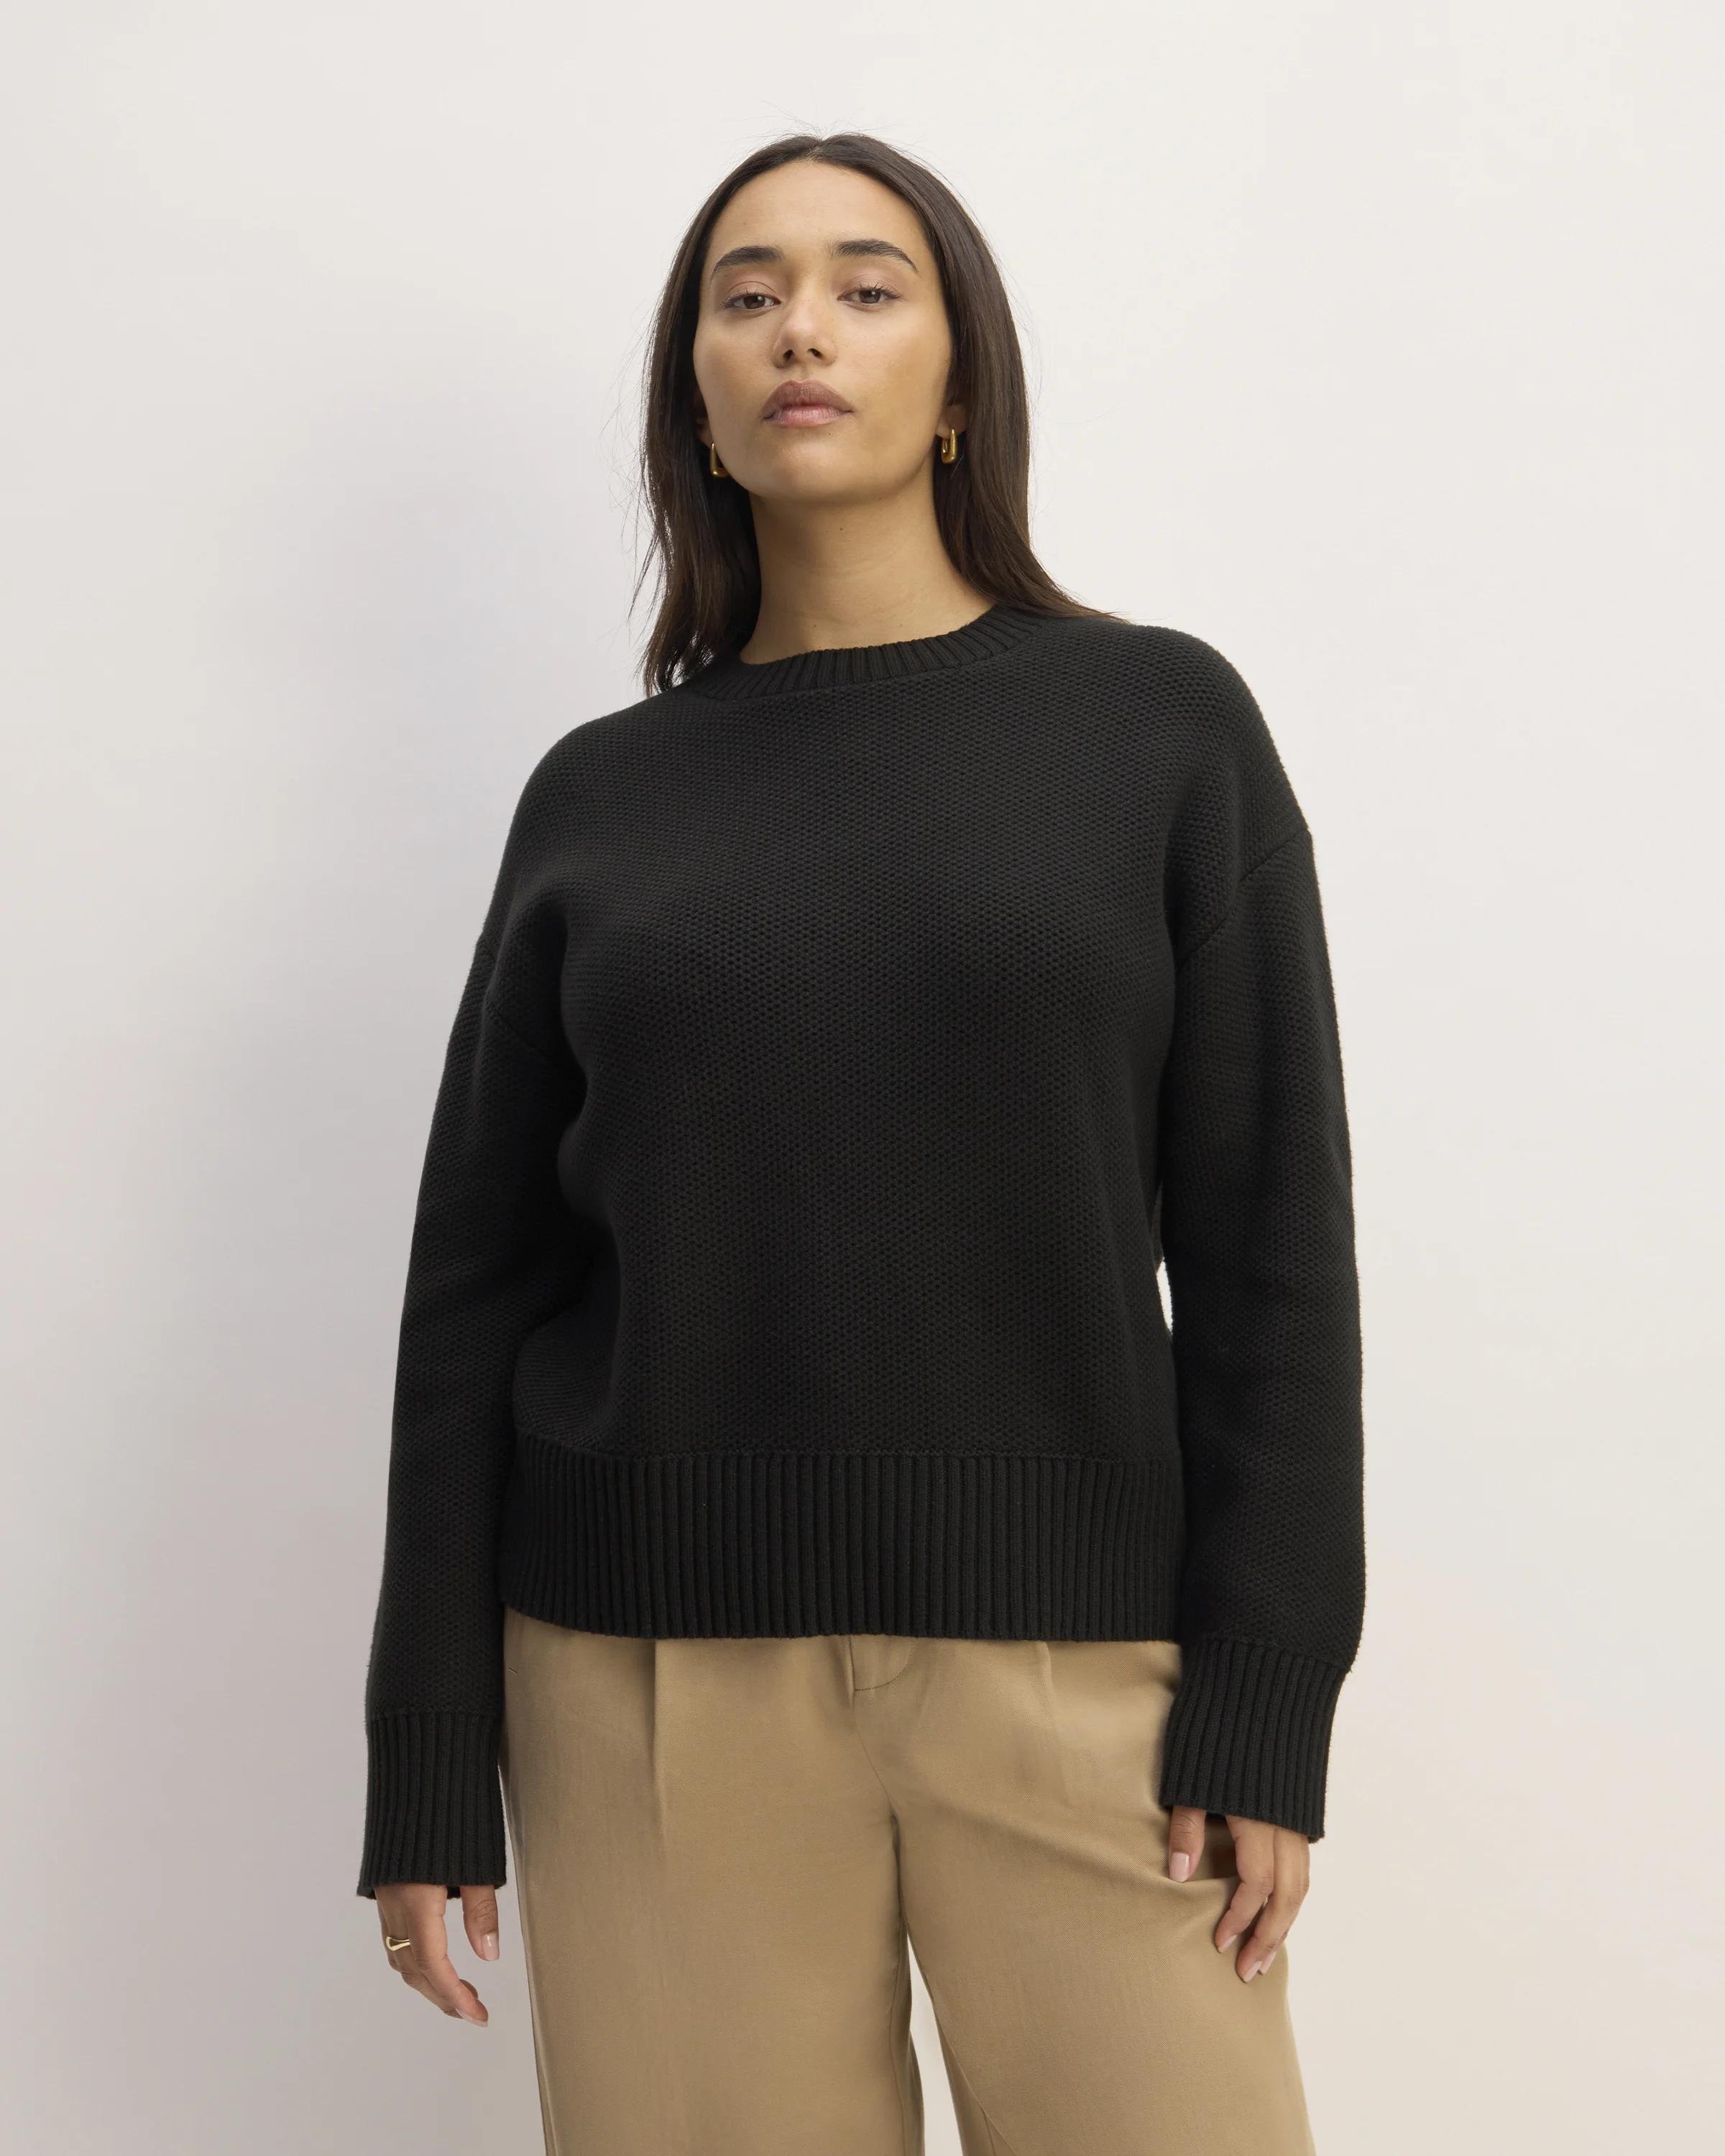 The Cotton Honeycomb Square Crew by EVERLANE